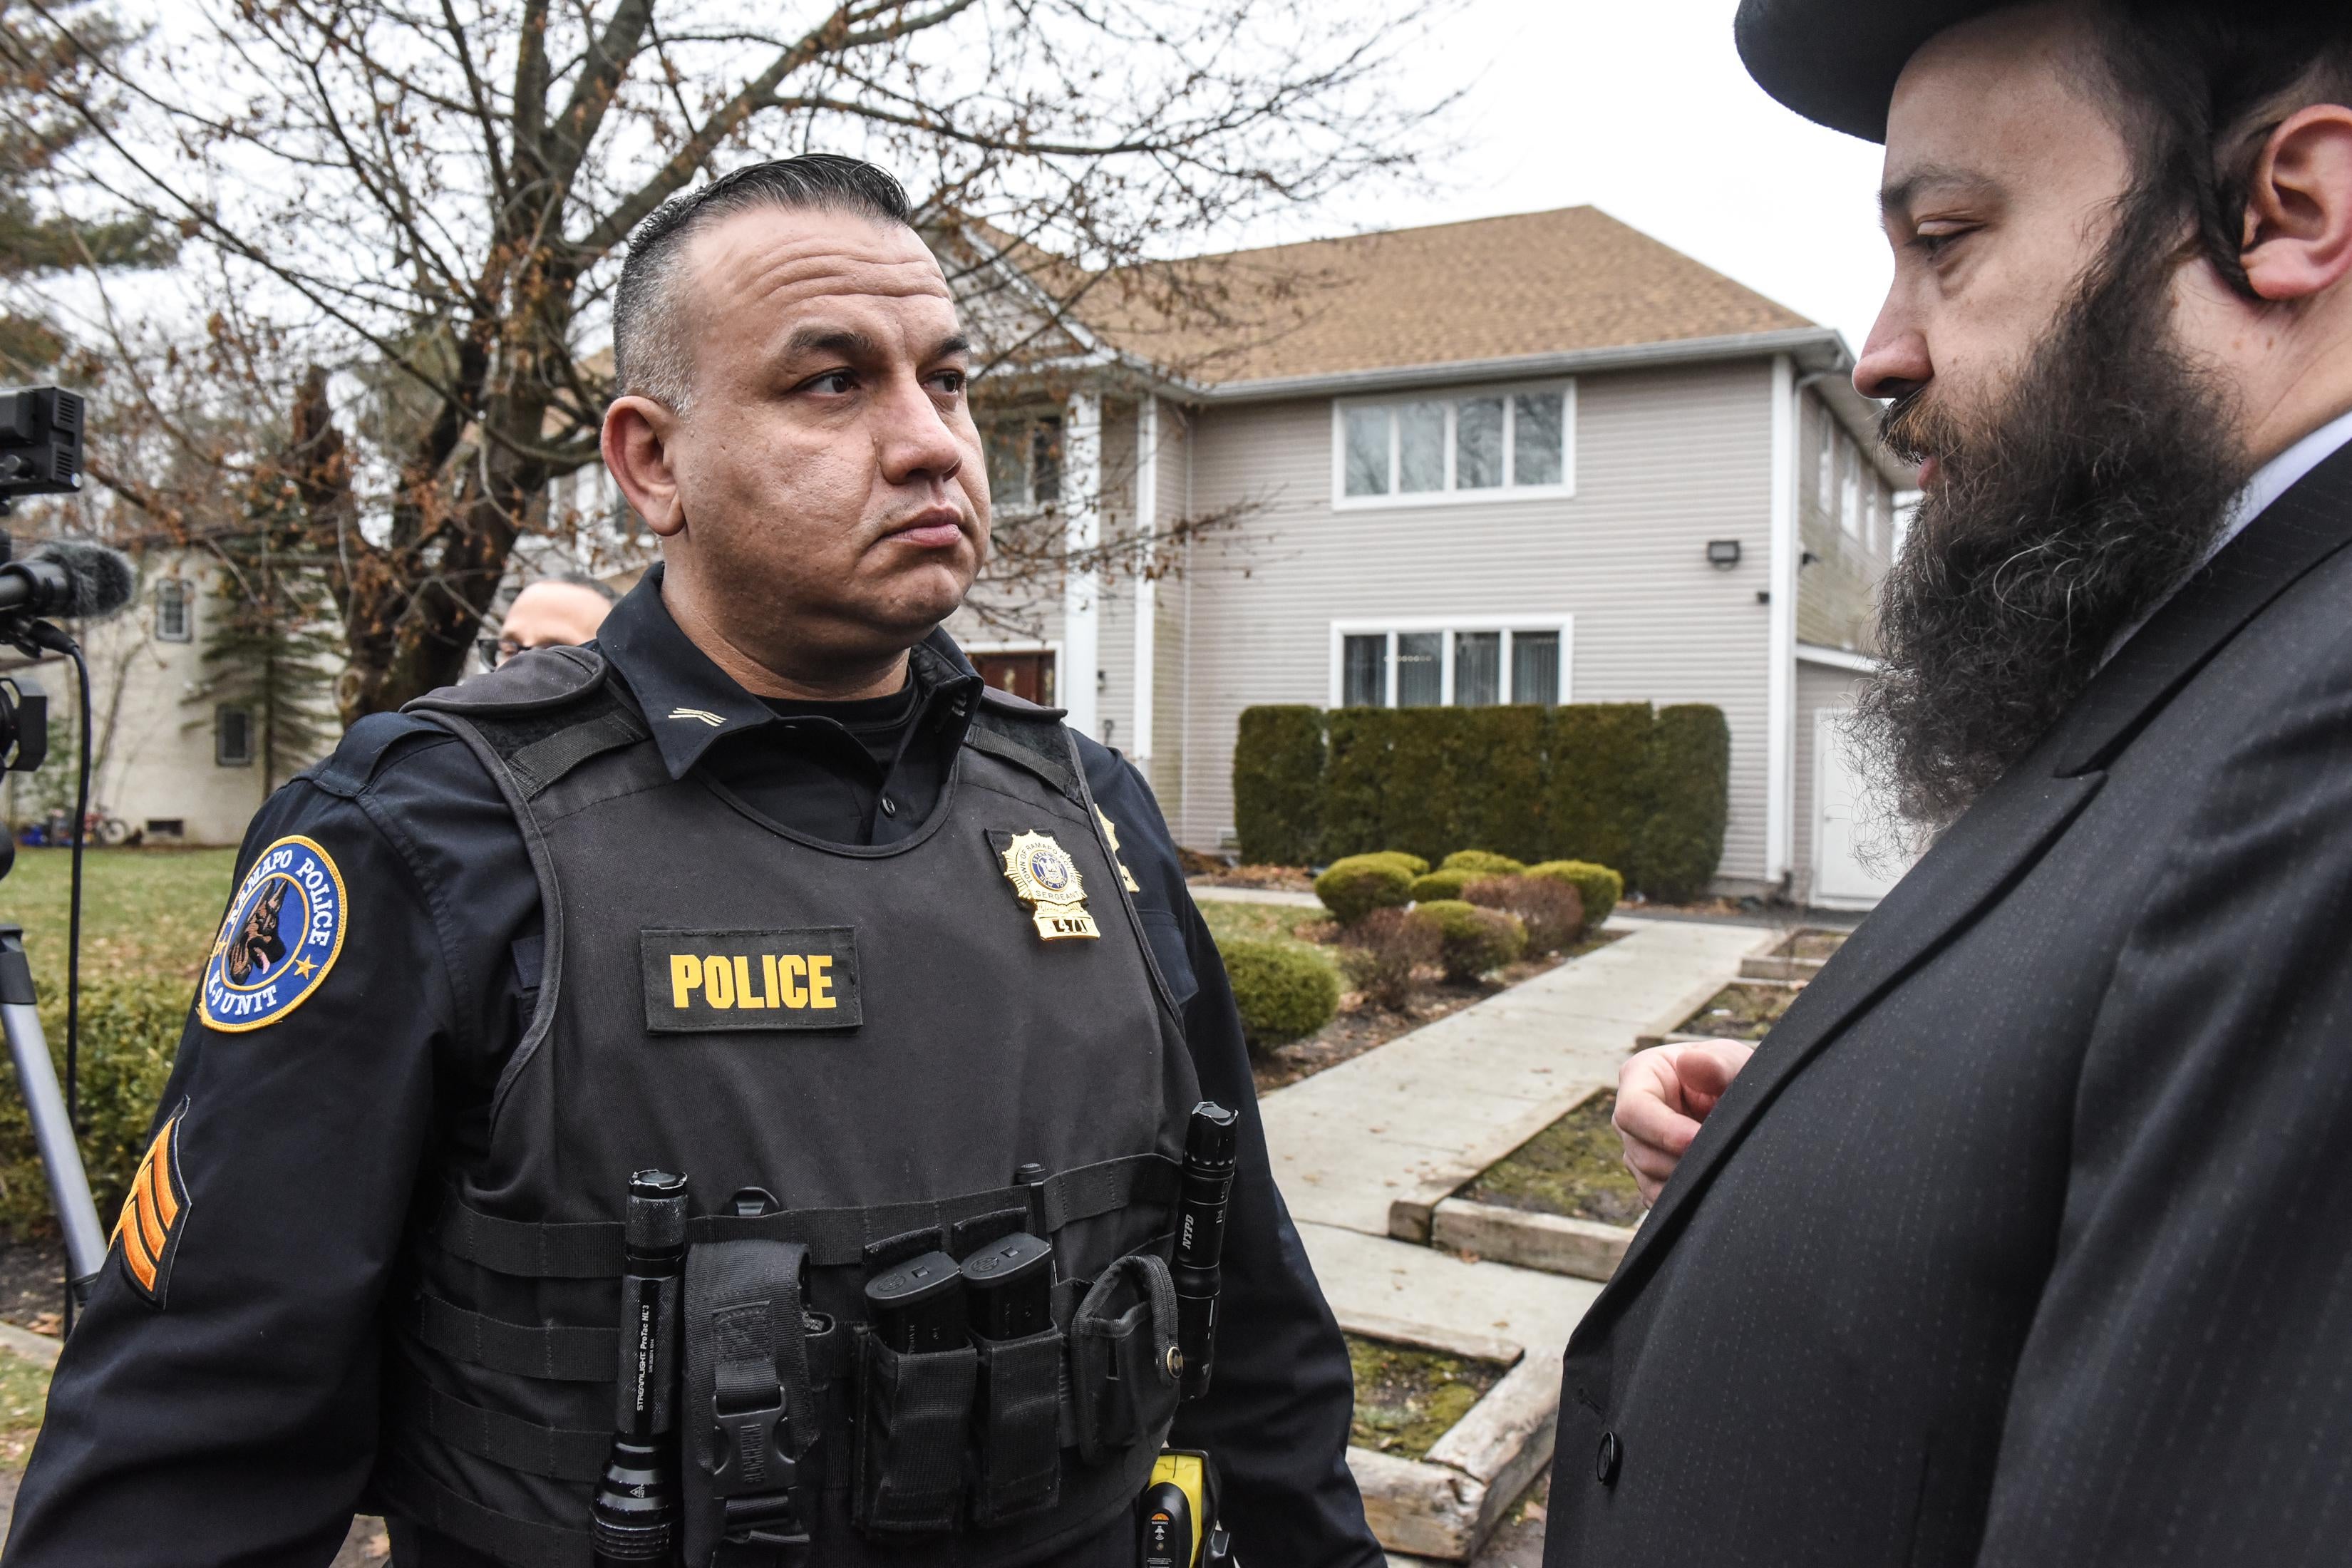 A police officer stands with another man in front of the house.